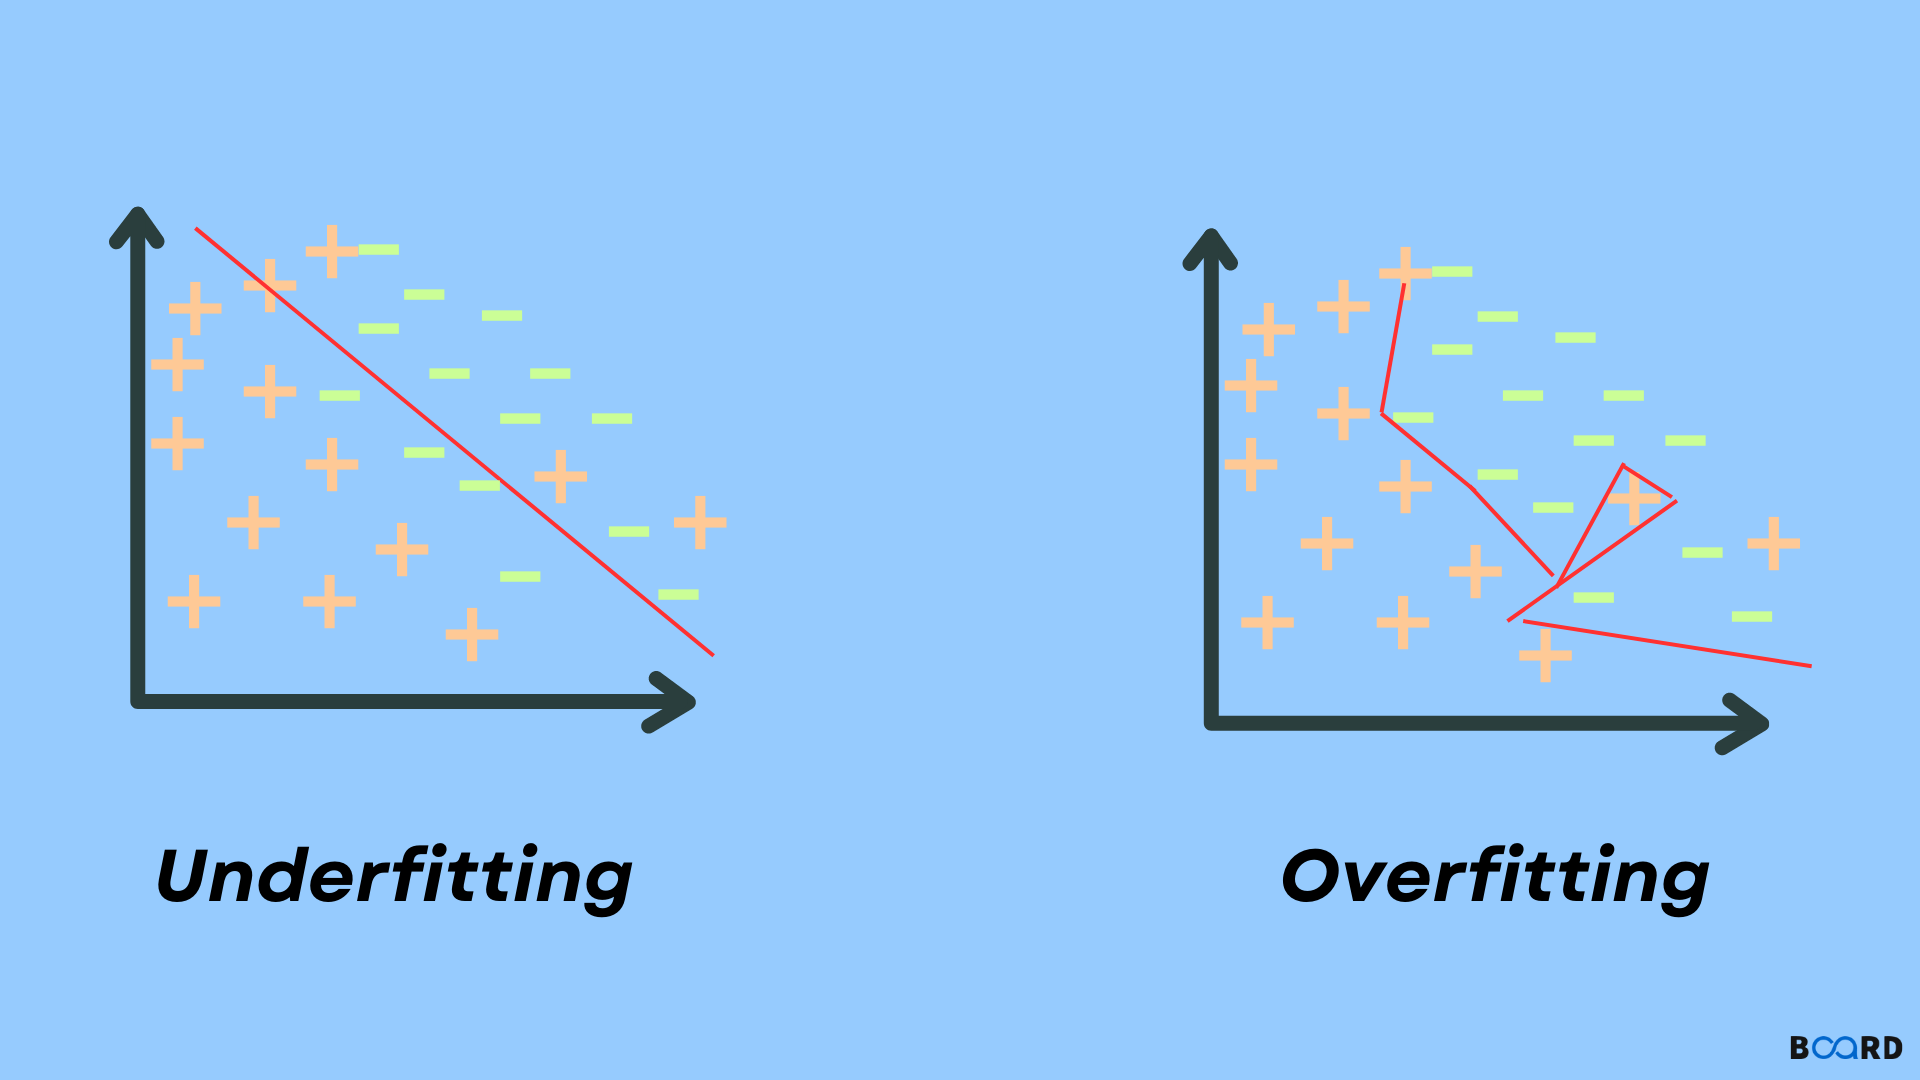 All About Overfitting and Underfitting - 360DigiTMG